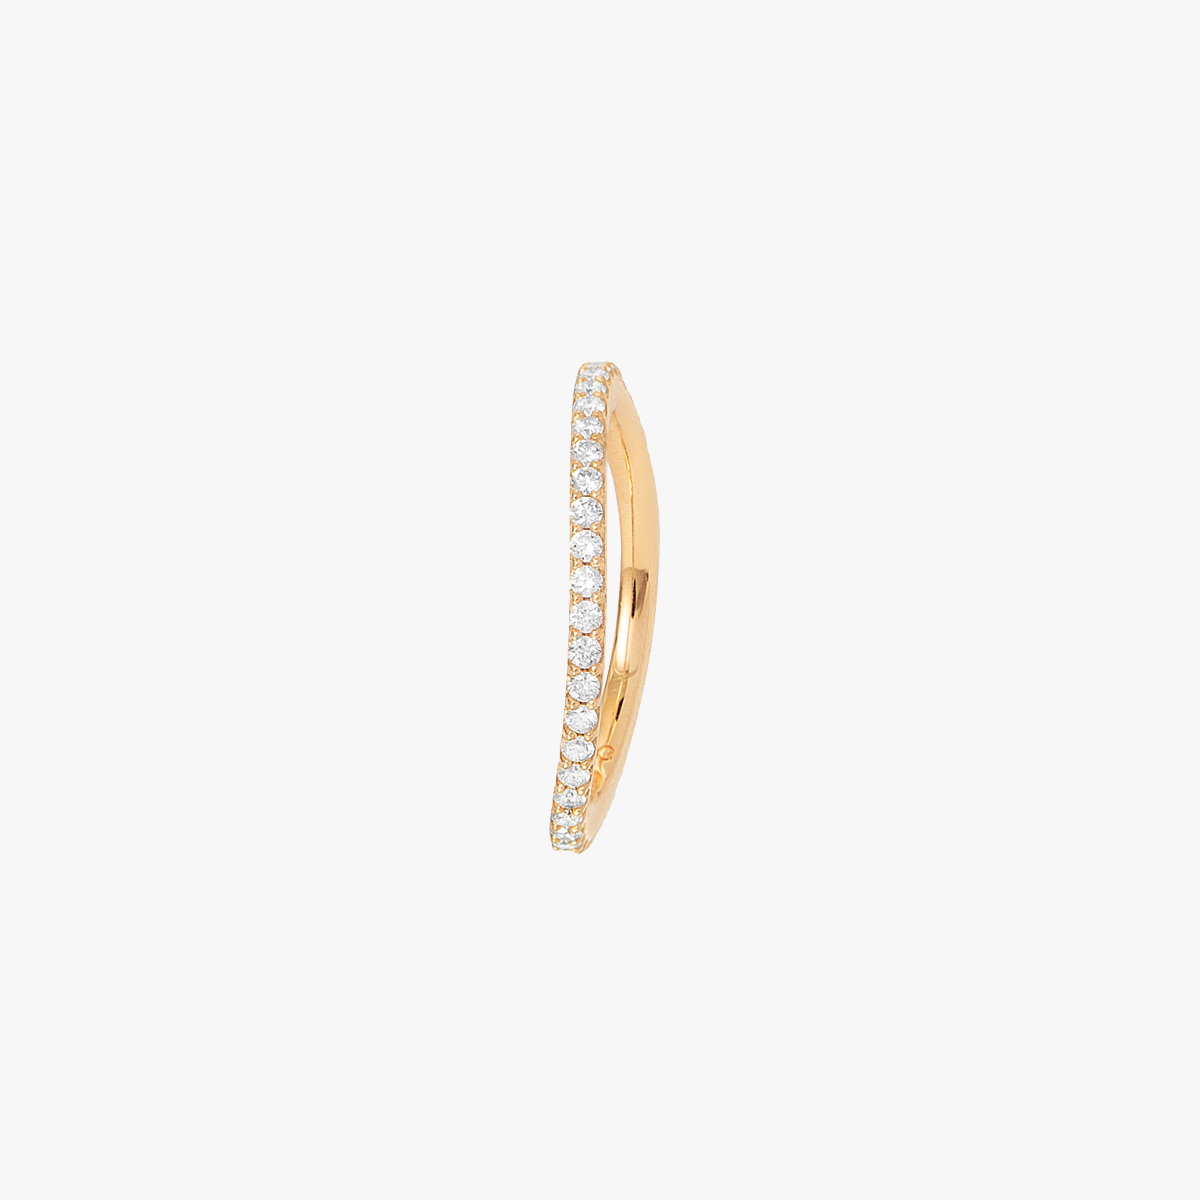 Curved love band in yellow gold with white diamond pavé